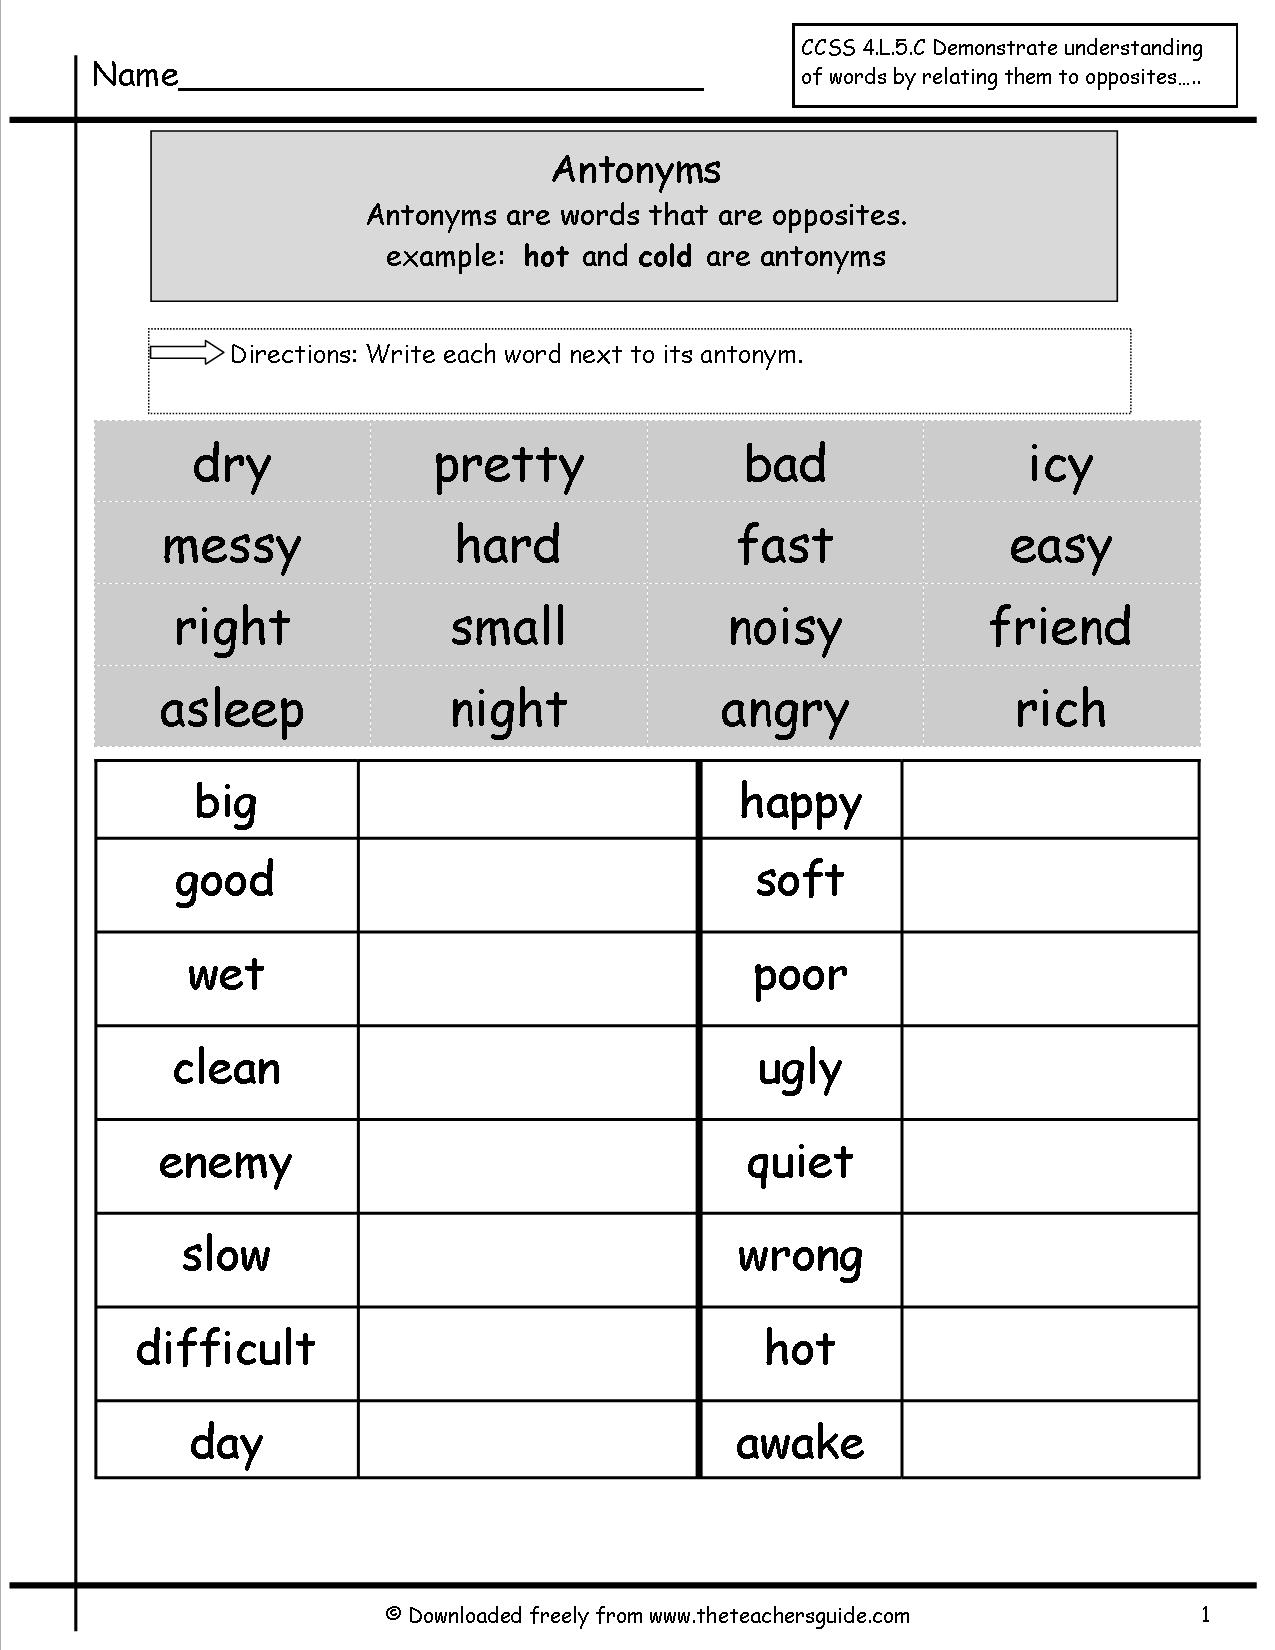 15-best-images-of-5th-grade-prefixes-and-suffixes-worksheets-prefix-and-suffix-worksheet-5th